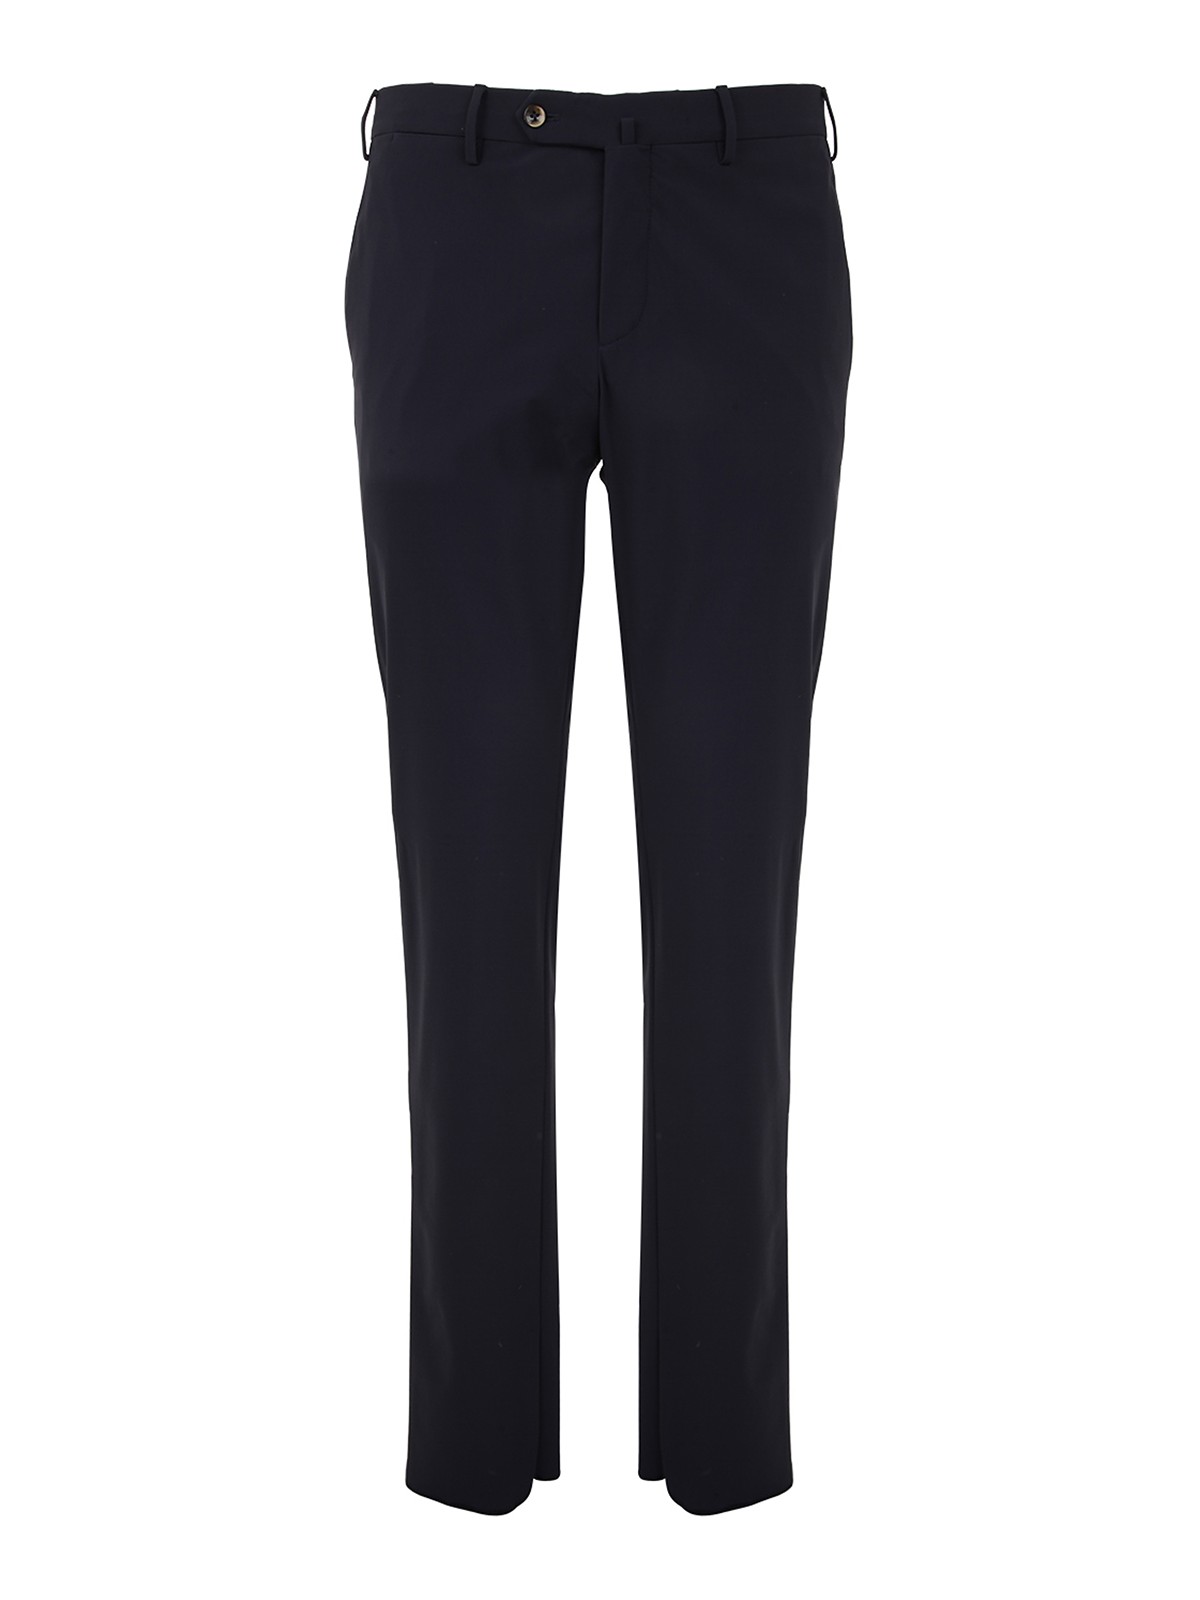 Pt Torino Stretched Trousers In Black